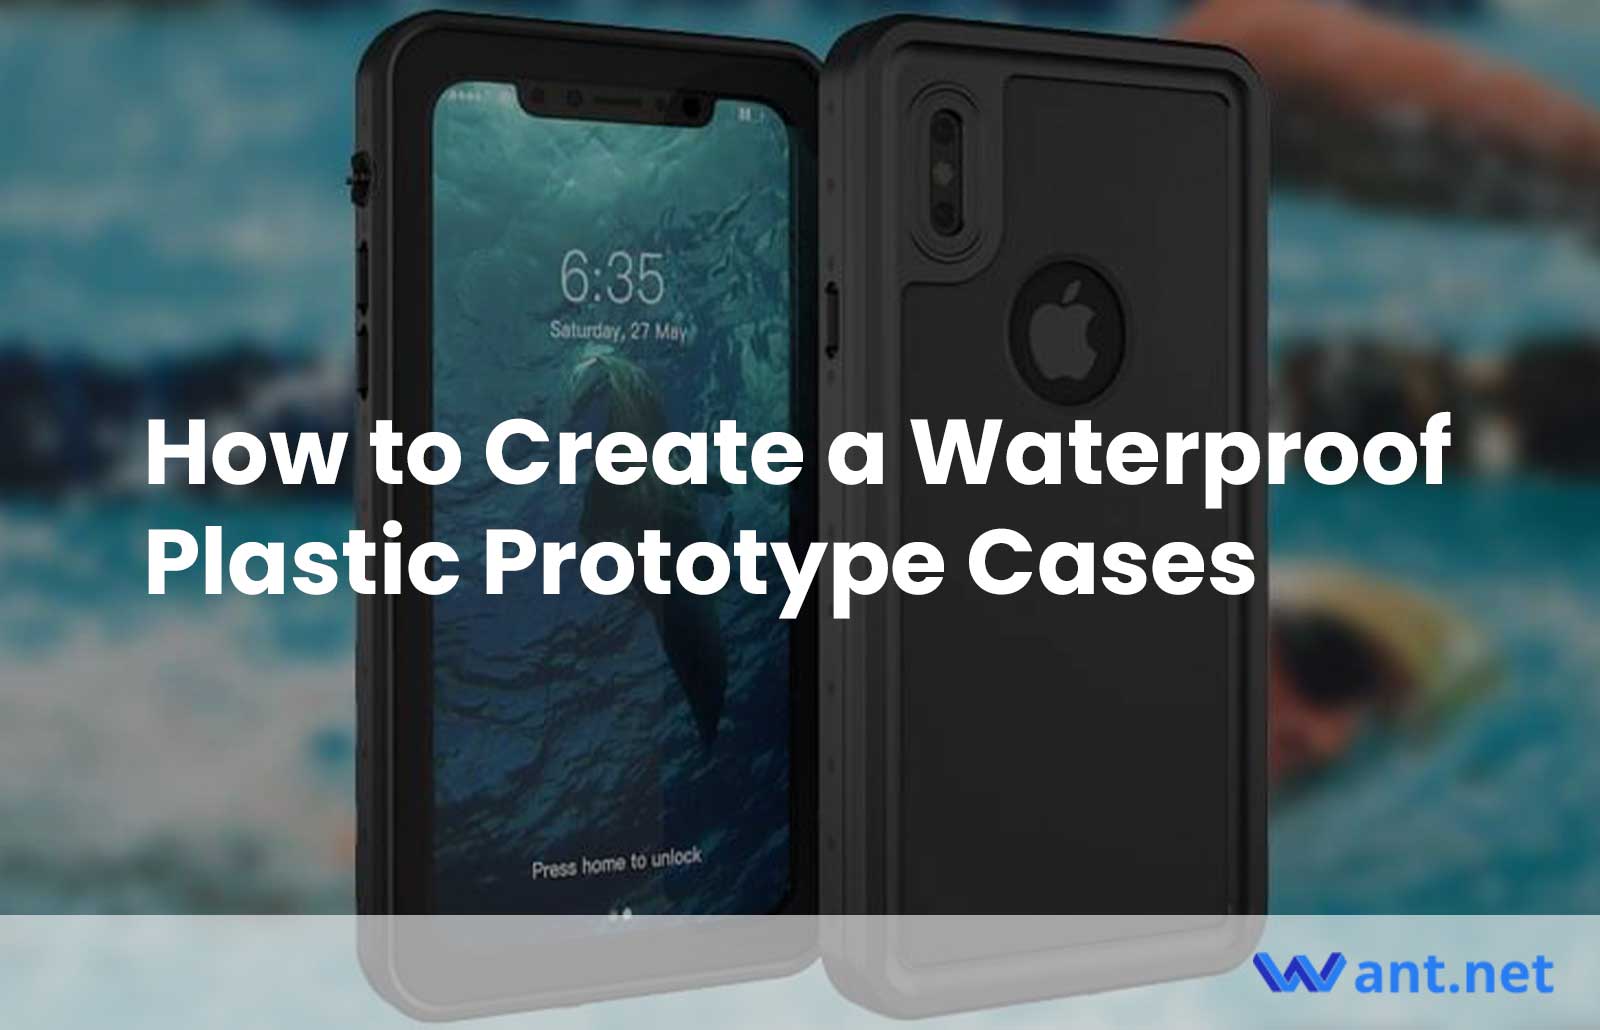 How to Create a Waterproof Plastic Prototype Cases